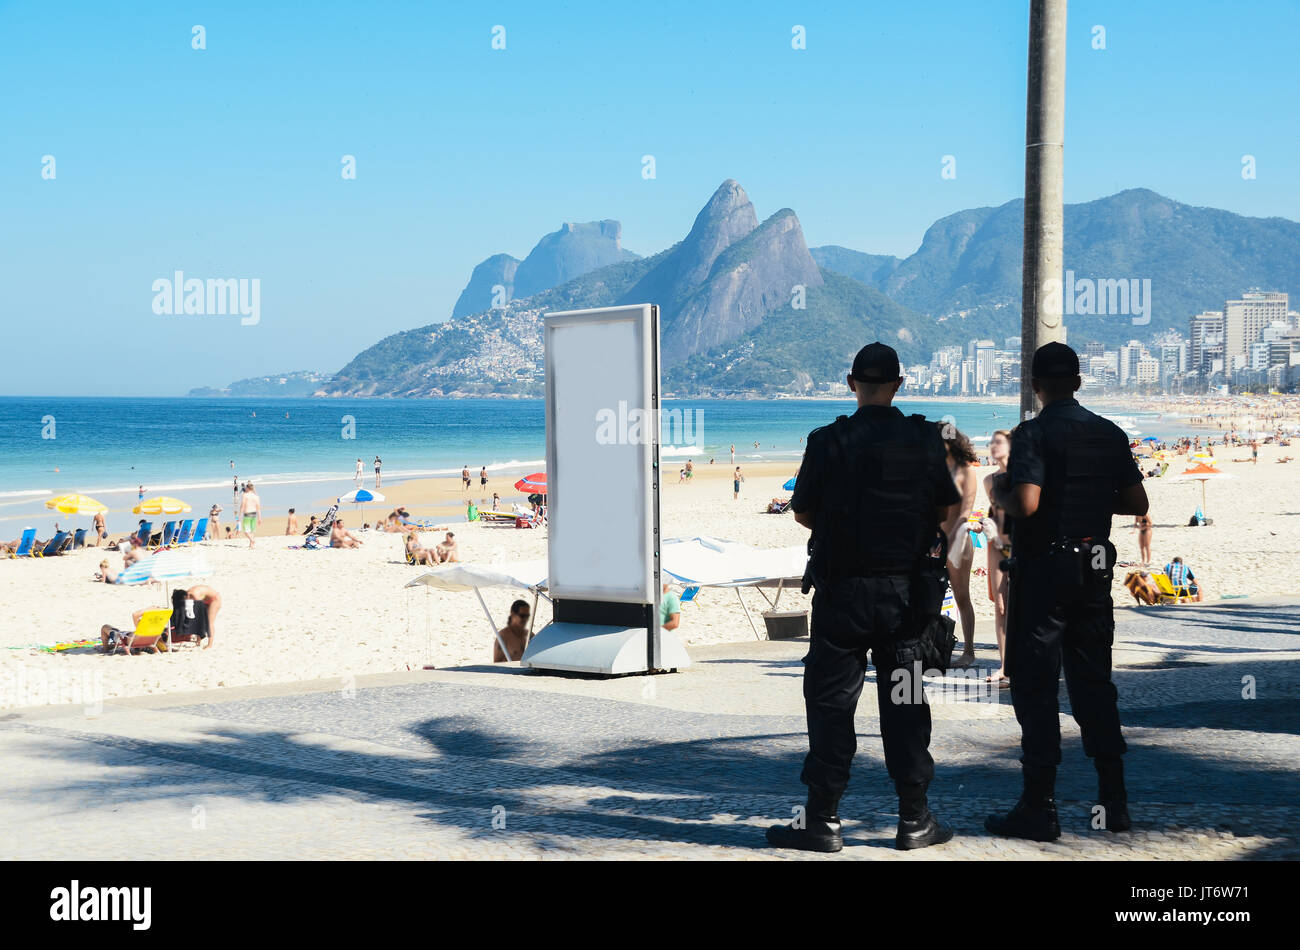 Police watch over tourists in Rio de Janeiro, Brazil. Rio is a popular tourist city but also experiences high levels of crime Stock Photo